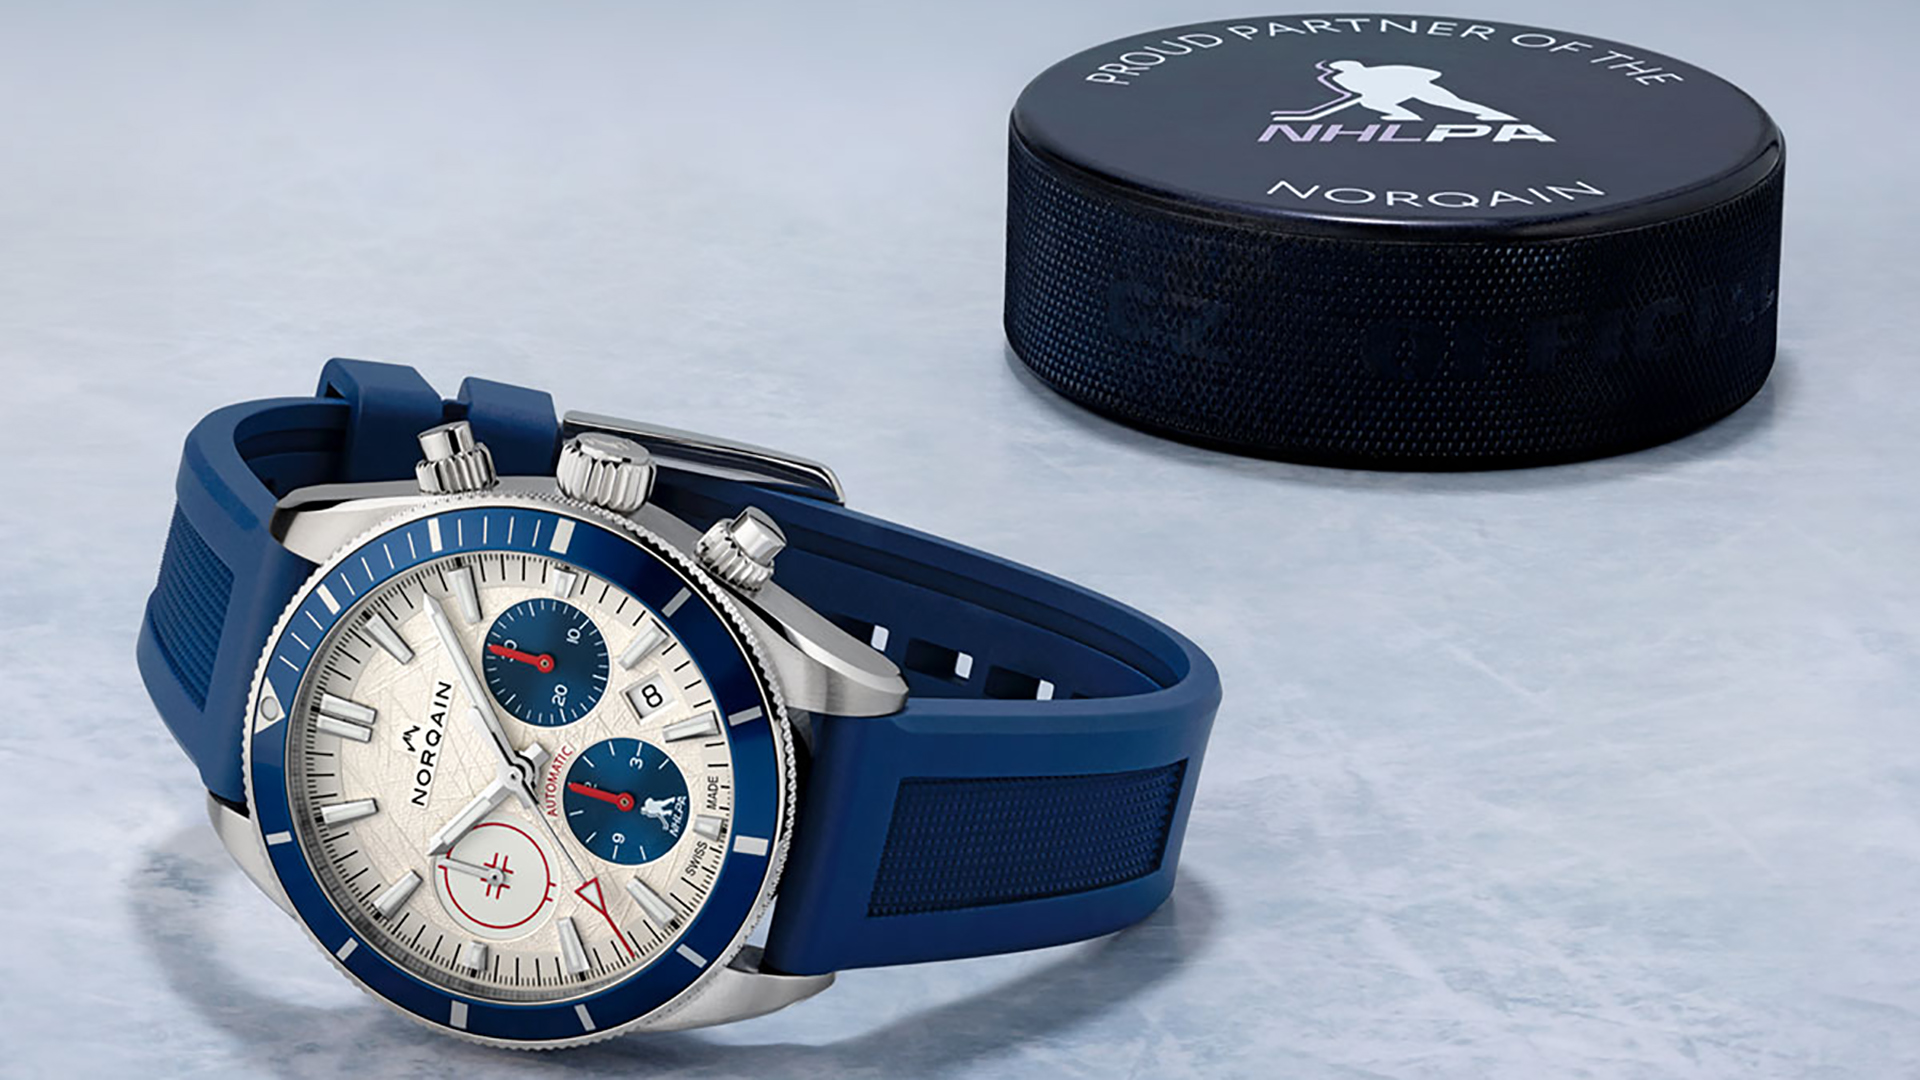 NORQAIN Announces New Limited Edition Adventure Sport Chrono NHLPA In Partnership With NHL Players? Association